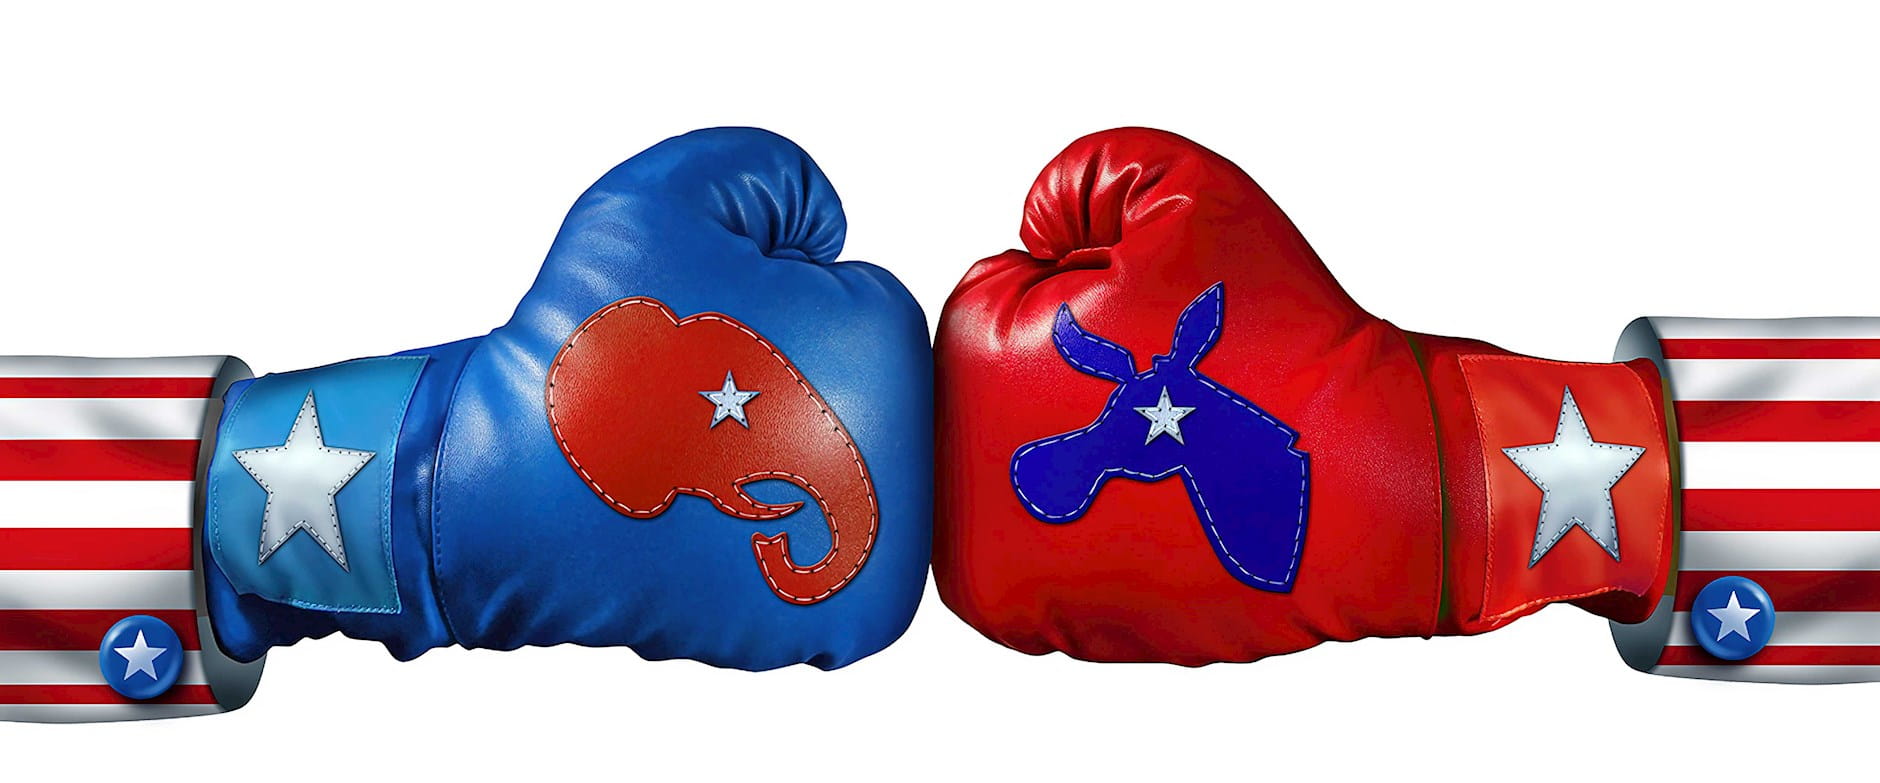 Politically marked boxing gloves clashing